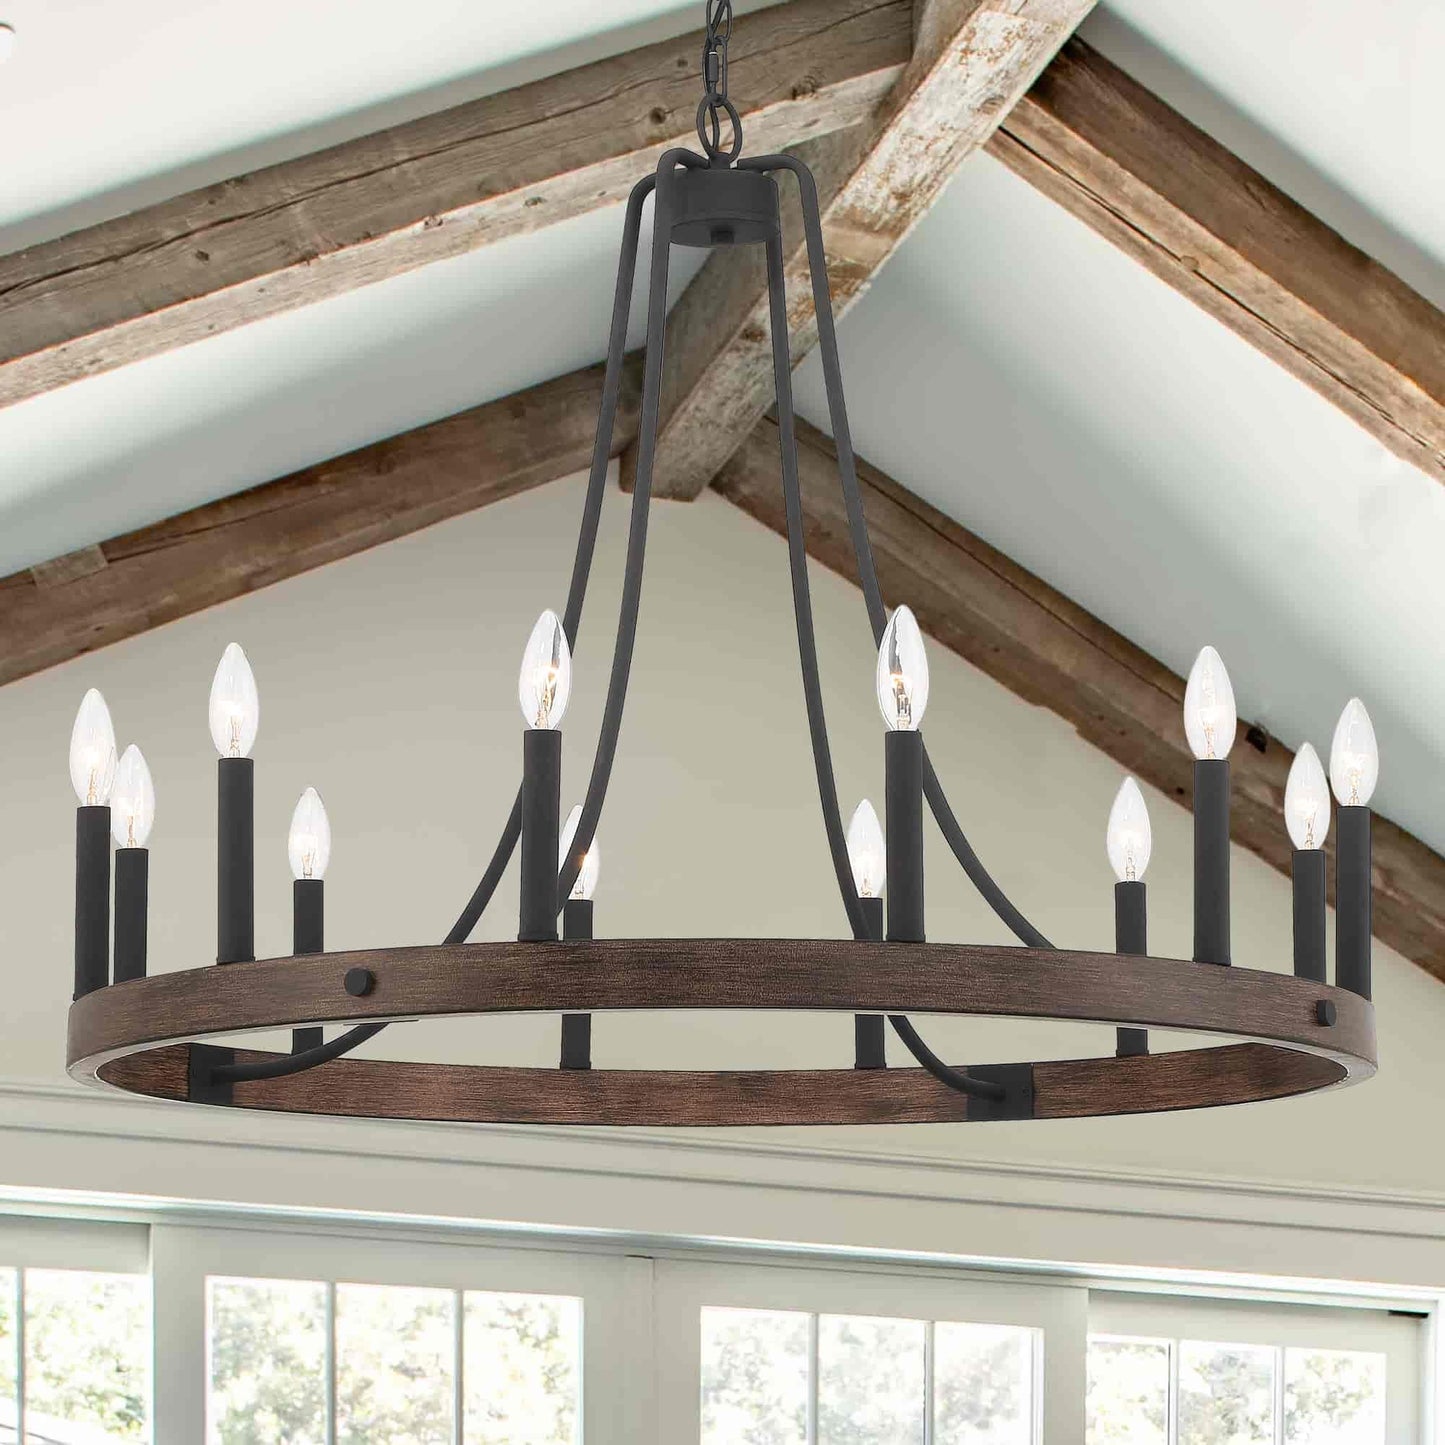 12 light candle style wagon wheel farmhouse chandelier (9) by ACROMA